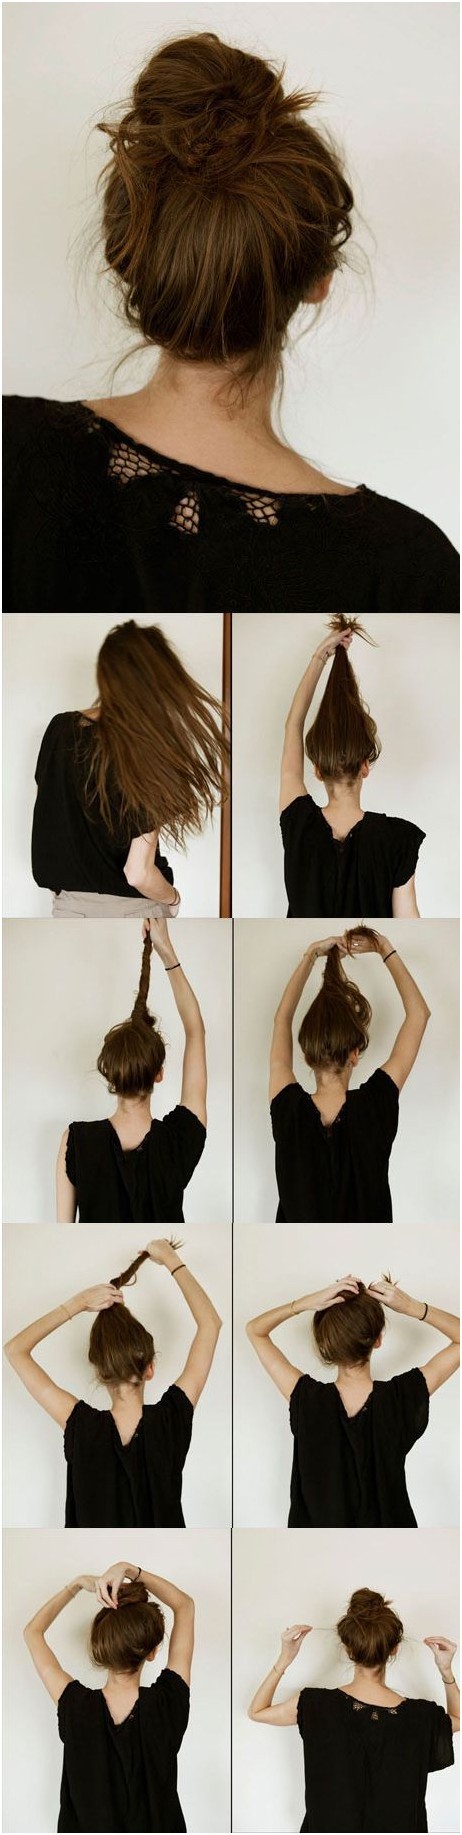 Everyday Hairstyles Tutorials: Casual Messy Bun Hairstyle